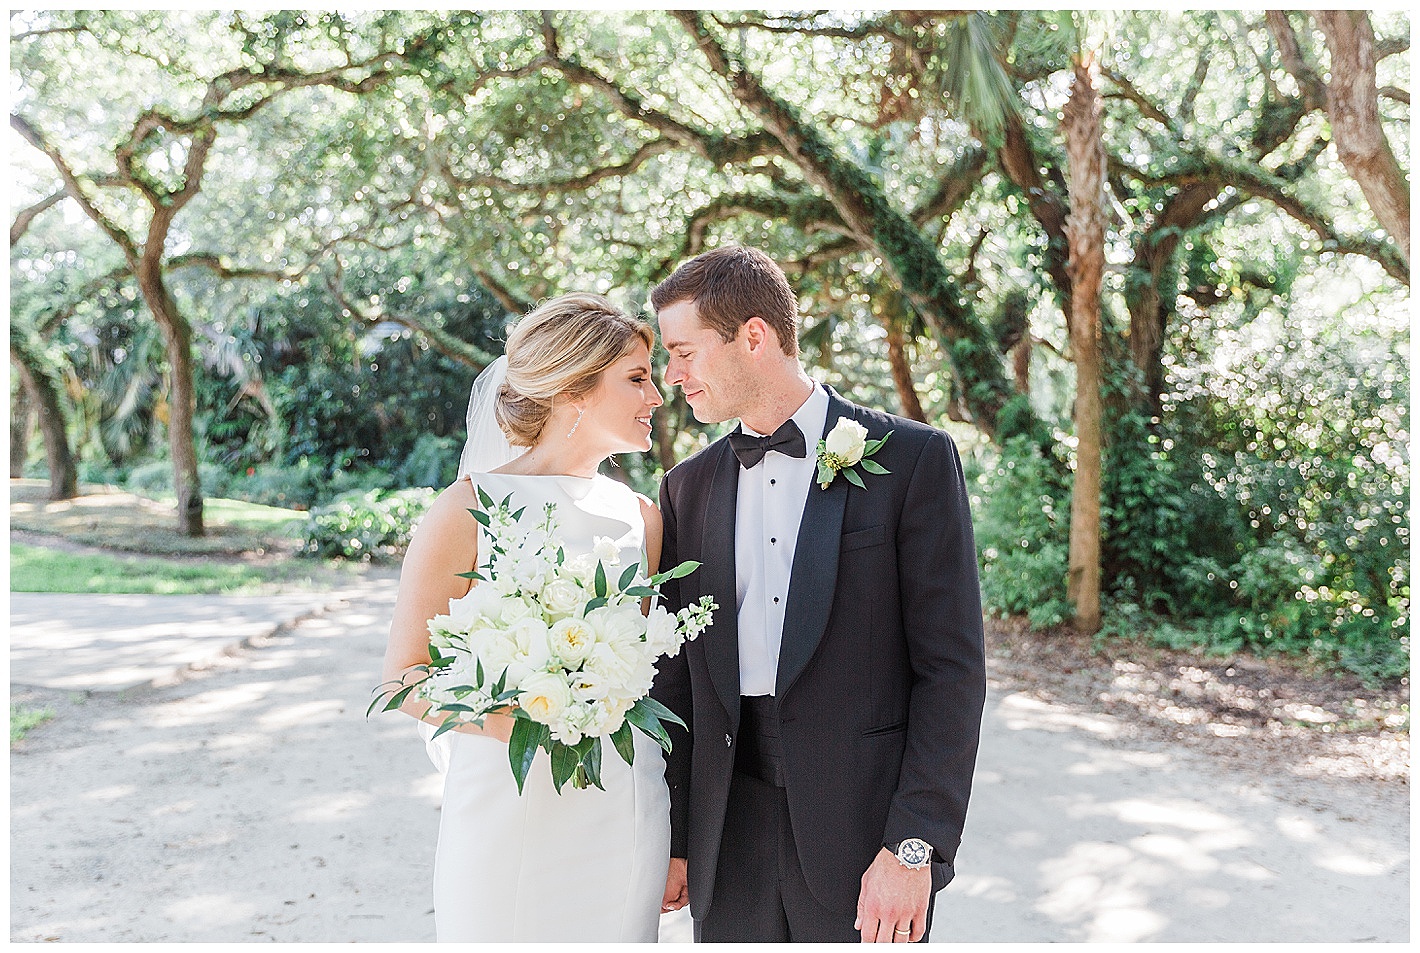 Andrea & Alexander | Quail Valley River Club Wedding » Central and ...